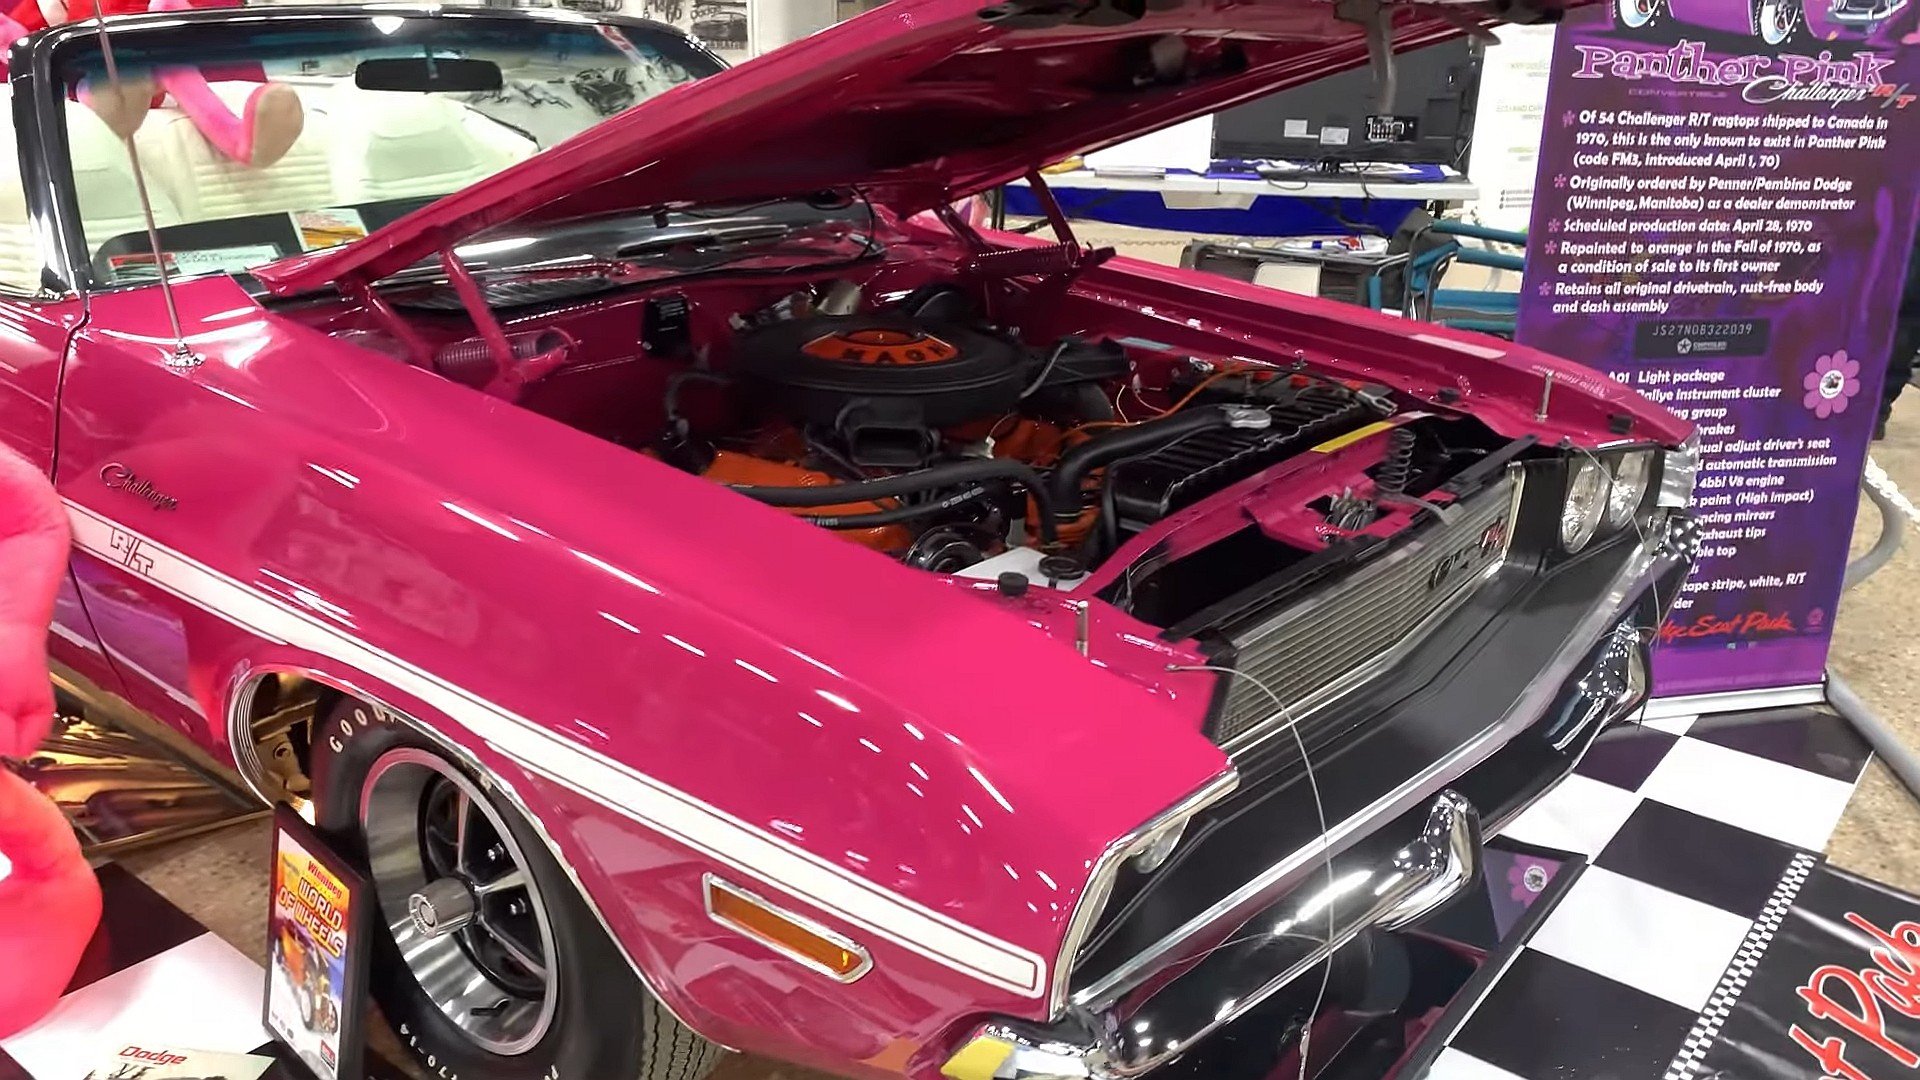 1970 Dodge Challenger restored to Panther Pink in time for